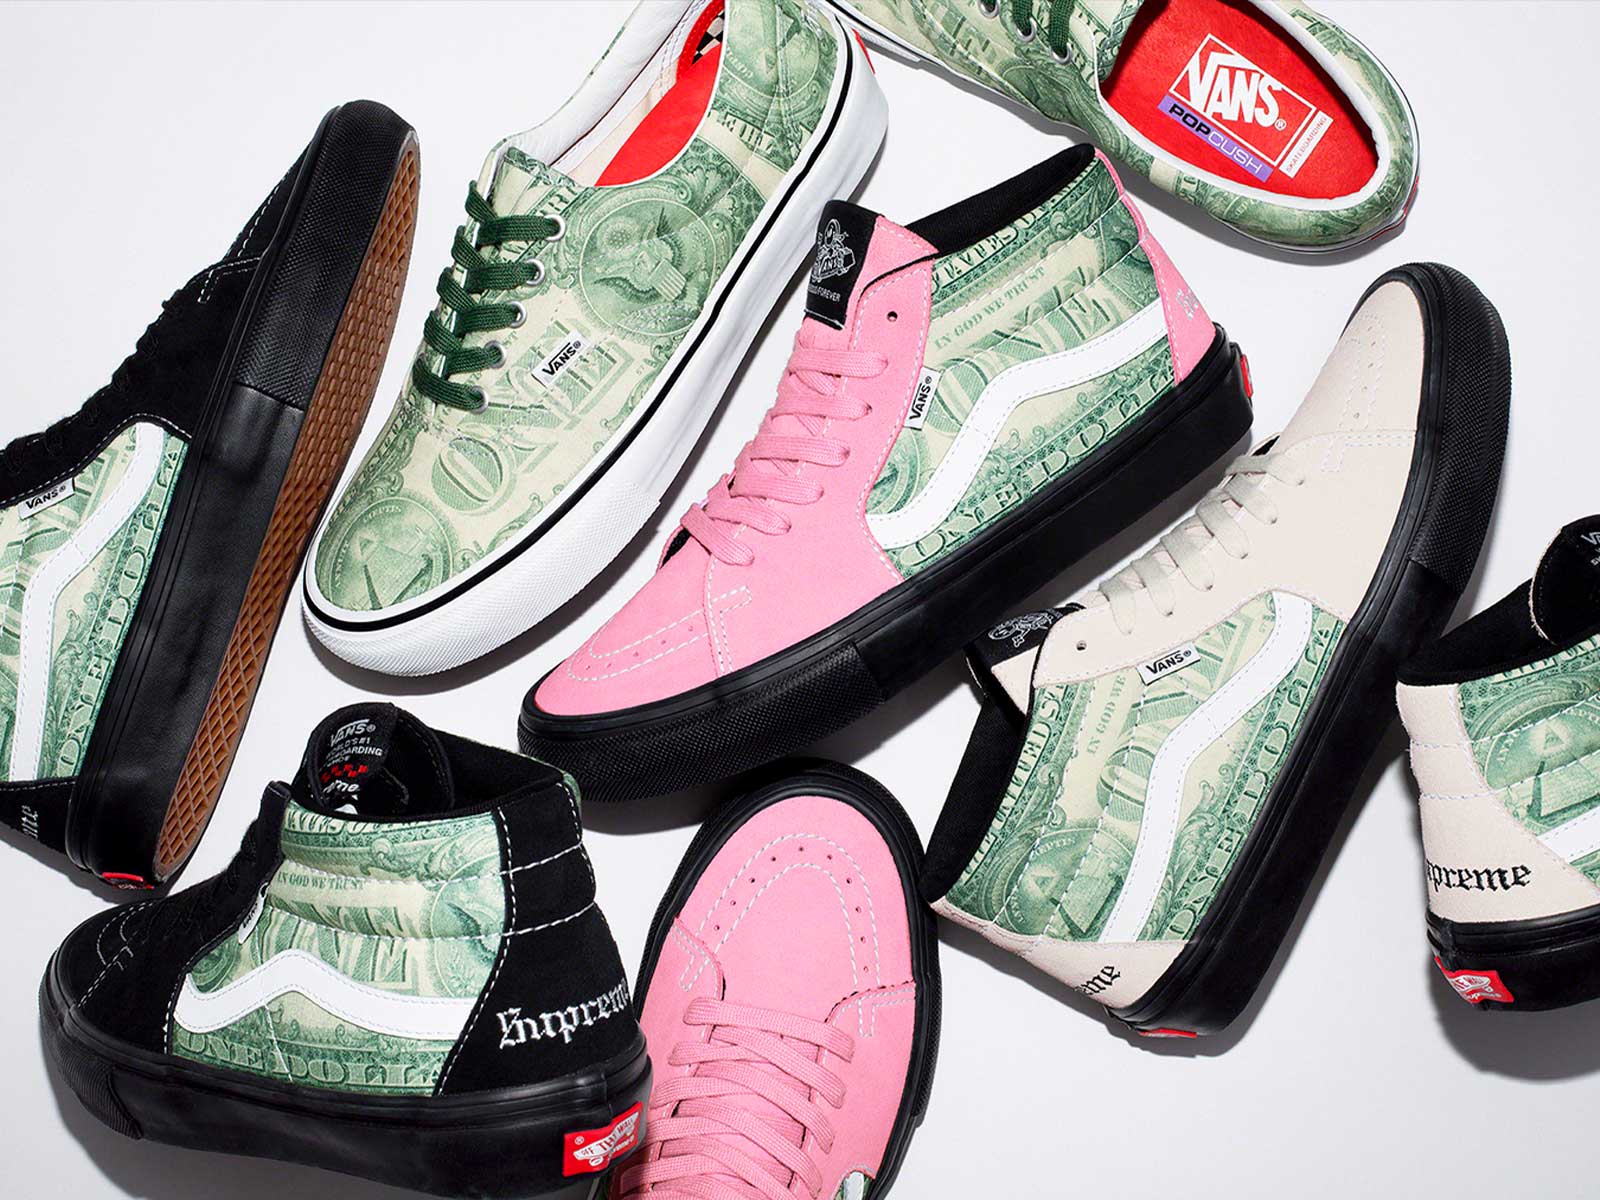 Supreme reconnects with Vans for Spring 2023 - HIGHXTAR.